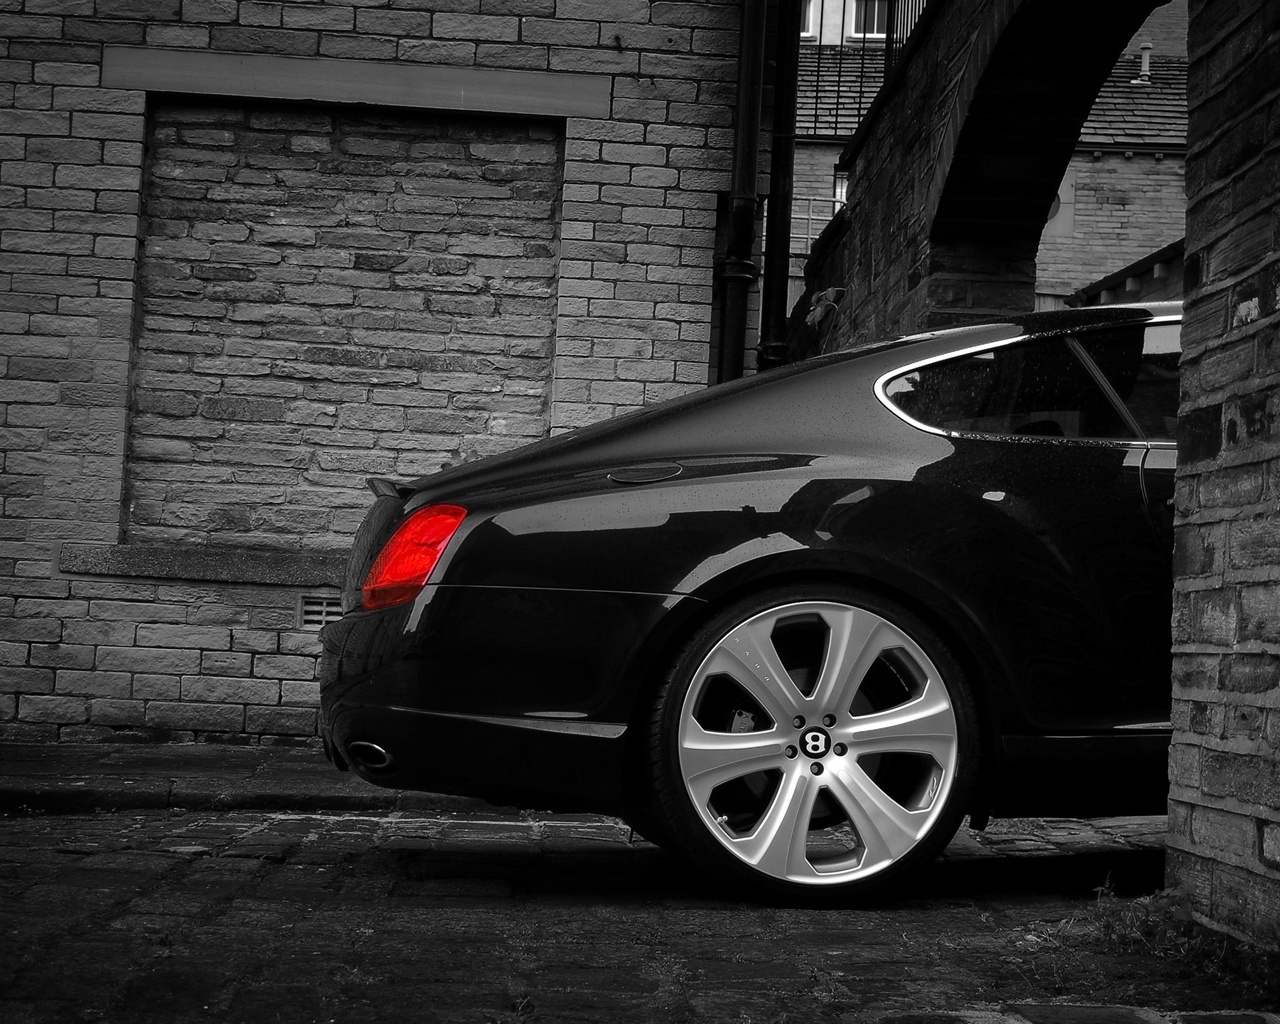 Bentley Continental GT S Project Kahn 2008 Rear for 1280 x 1024 resolution